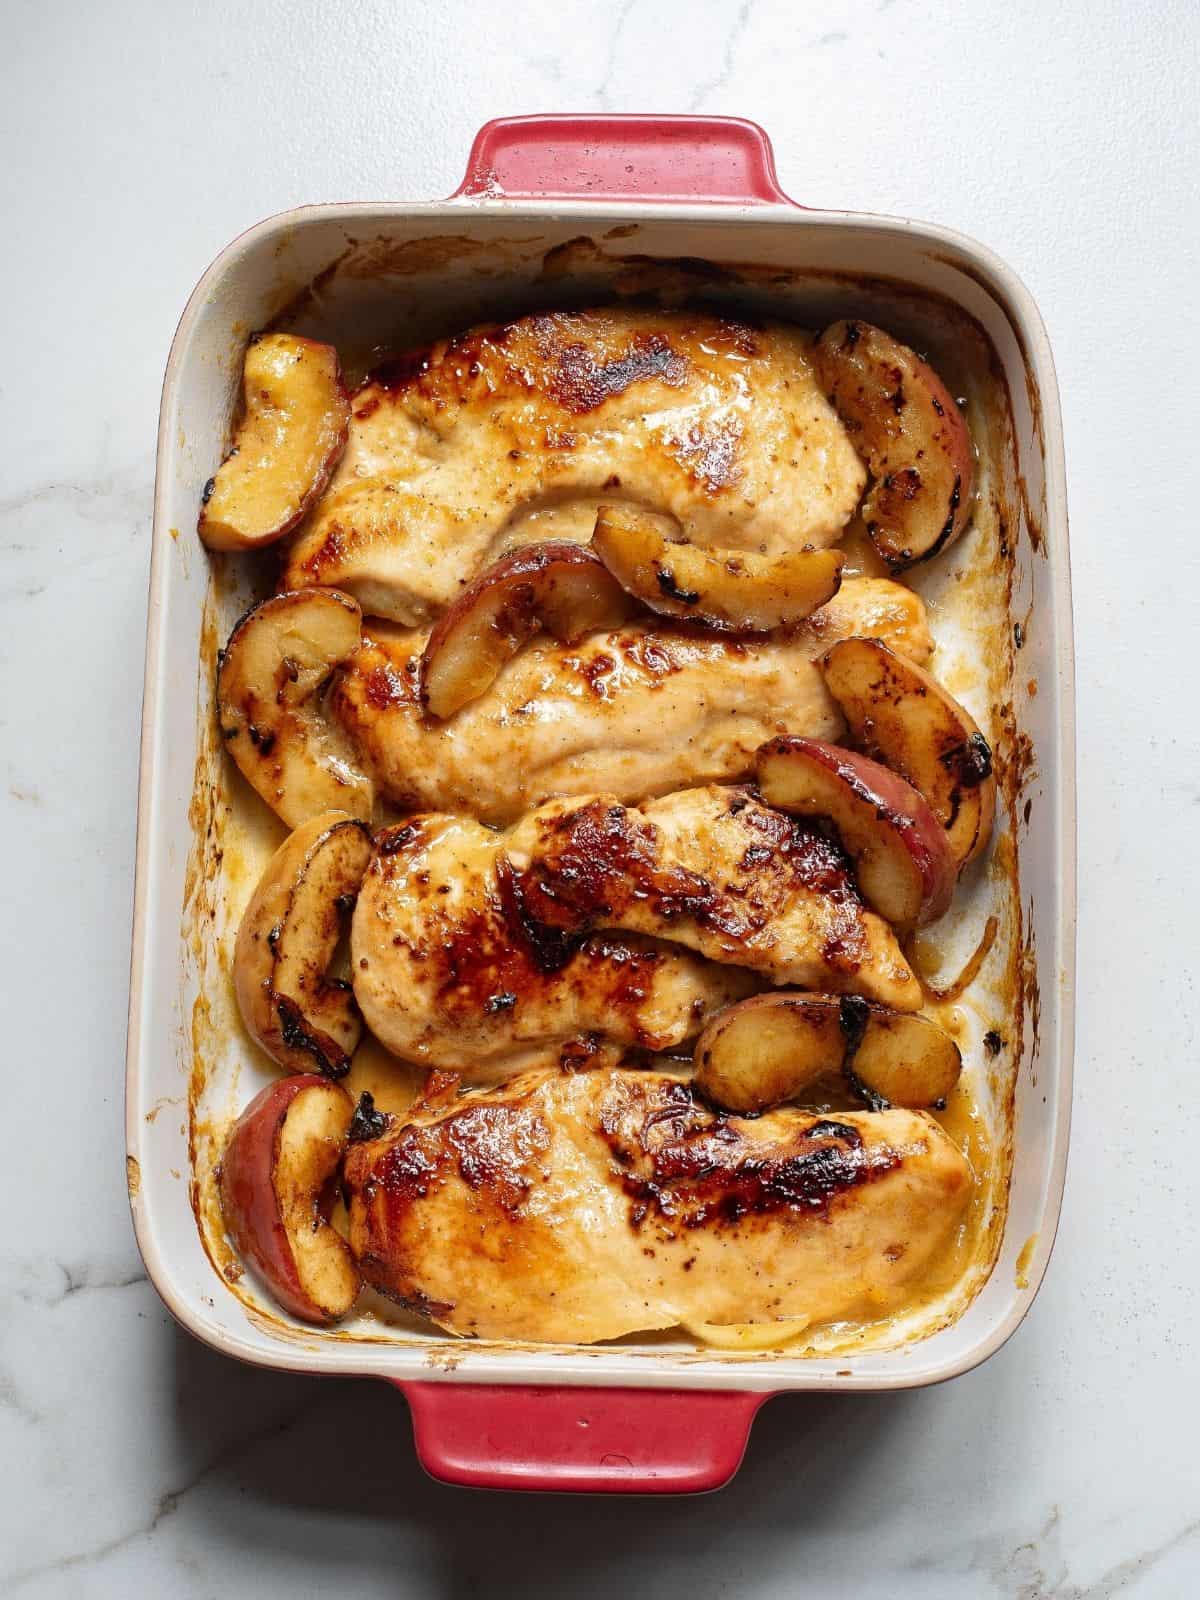 baked chicken with apples in baking dish.